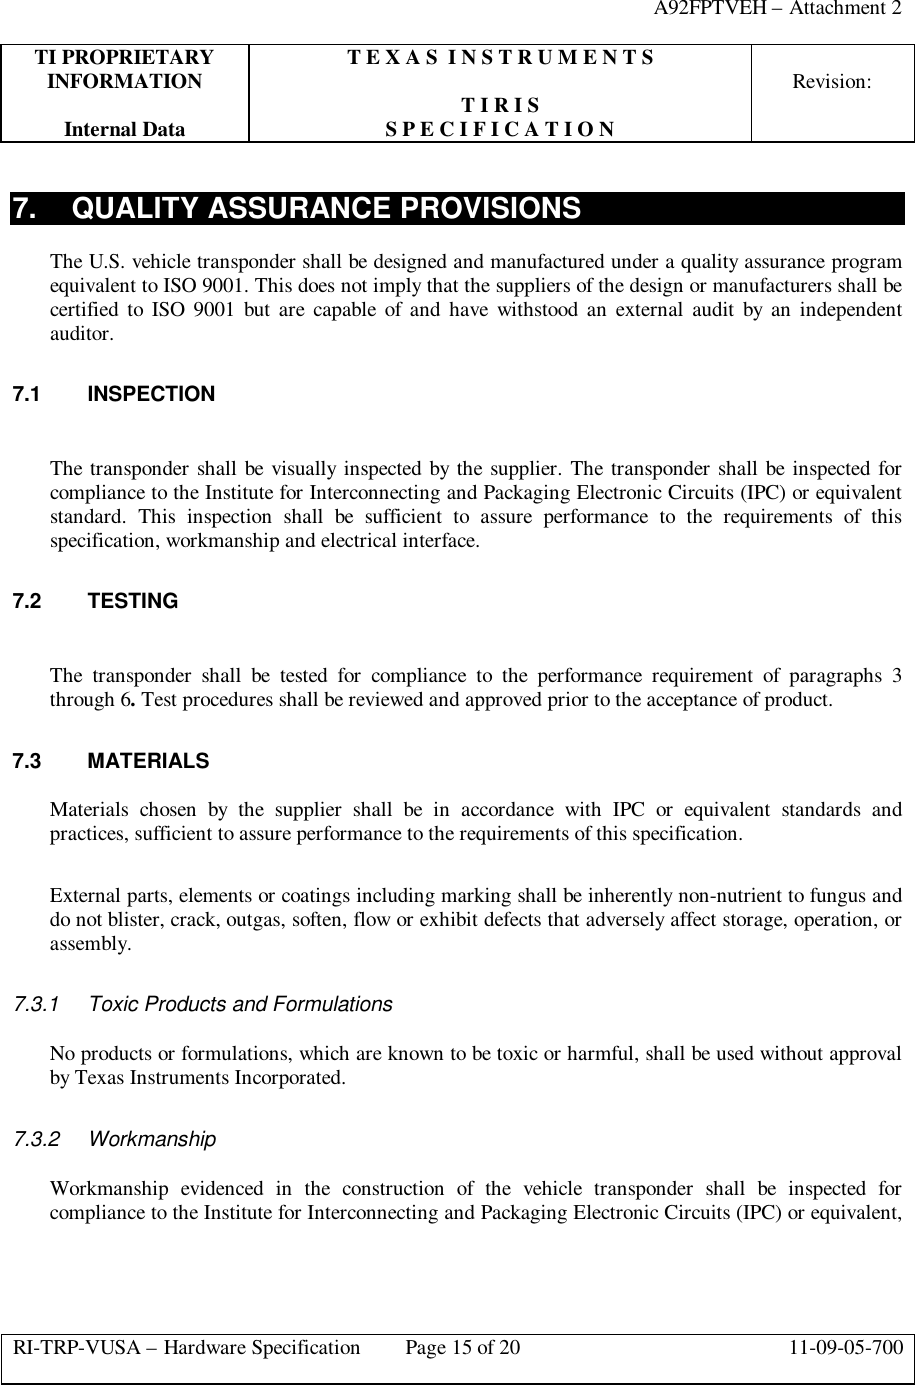 A92FPTVEH – Attachment 2TI PROPRIETARY T E X A S  I N S T R U M E N T SINFORMATION Revision:T I R I SInternal Data S P E C I F I C A T I O NRI-TRP-VUSA – Hardware Specification Page 15 of 20 11-09-05-7007. QUALITY ASSURANCE PROVISIONSThe U.S. vehicle transponder shall be designed and manufactured under a quality assurance programequivalent to ISO 9001. This does not imply that the suppliers of the design or manufacturers shall becertified to ISO 9001 but are capable of and have withstood an external audit by an independentauditor.7.1 INSPECTIONThe transponder shall be visually inspected by the supplier. The transponder shall be inspected forcompliance to the Institute for Interconnecting and Packaging Electronic Circuits (IPC) or equivalentstandard. This inspection shall be sufficient to assure performance to the requirements of thisspecification, workmanship and electrical interface.7.2 TESTINGThe transponder shall be tested for compliance to the performance requirement of paragraphs 3through 6. Test procedures shall be reviewed and approved prior to the acceptance of product.7.3 MATERIALSMaterials chosen by the supplier shall be in accordance with IPC or equivalent standards andpractices, sufficient to assure performance to the requirements of this specification.External parts, elements or coatings including marking shall be inherently non-nutrient to fungus anddo not blister, crack, outgas, soften, flow or exhibit defects that adversely affect storage, operation, orassembly.7.3.1 Toxic Products and FormulationsNo products or formulations, which are known to be toxic or harmful, shall be used without approvalby Texas Instruments Incorporated.7.3.2 WorkmanshipWorkmanship evidenced in the construction of the vehicle transponder shall be inspected forcompliance to the Institute for Interconnecting and Packaging Electronic Circuits (IPC) or equivalent,